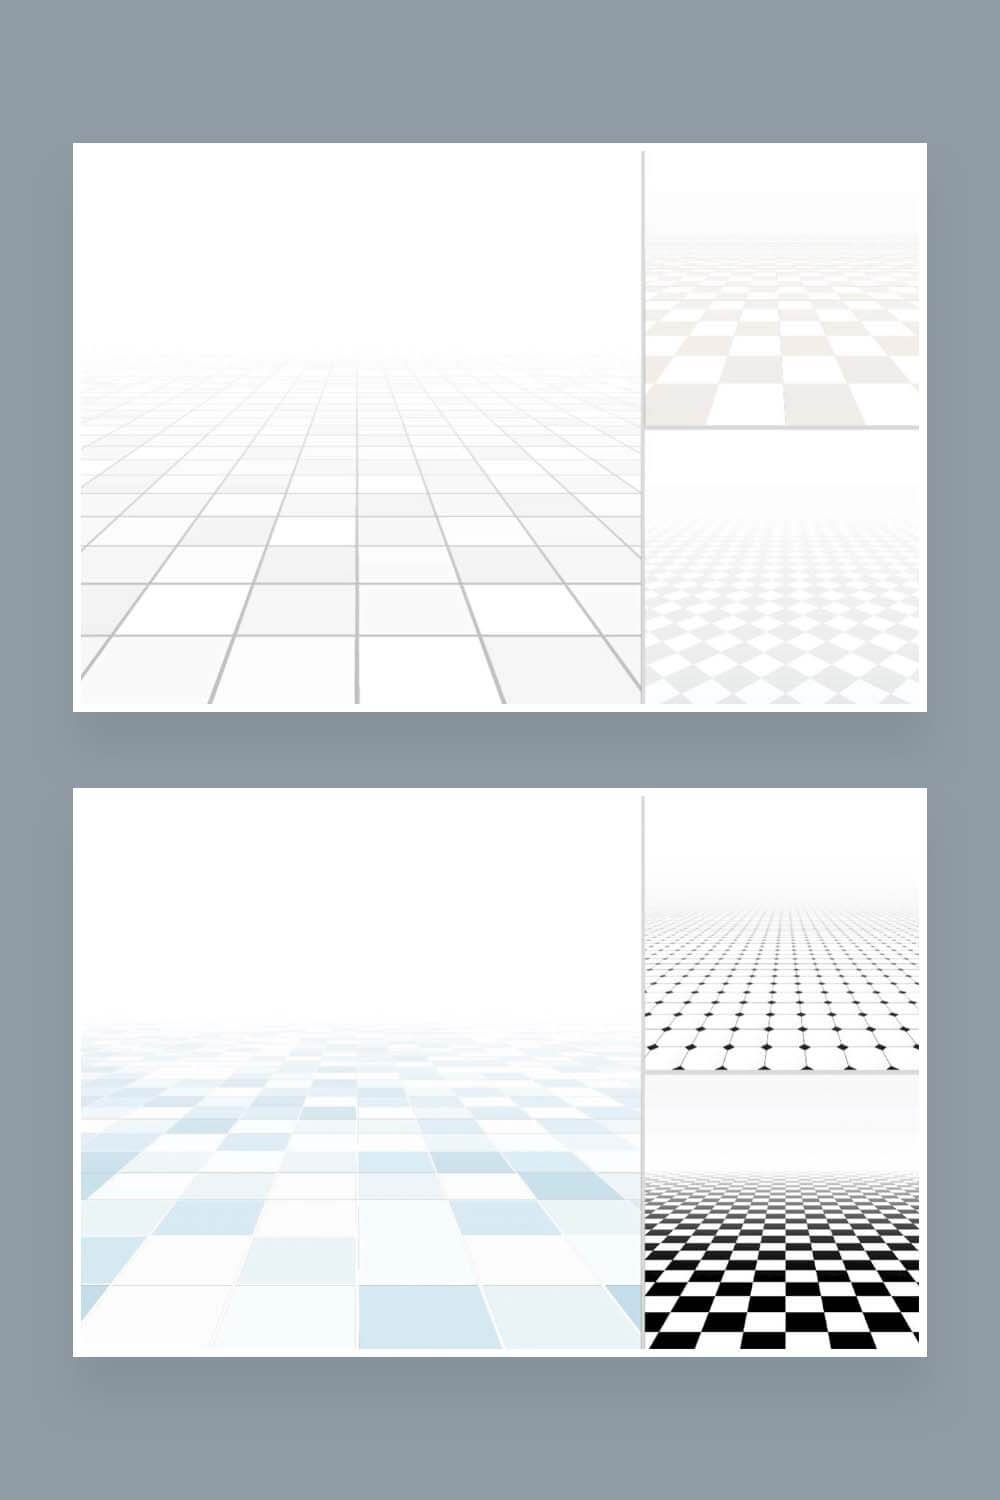 Two pictures with abstract perspective background, checkered floors in different sizes and colors.